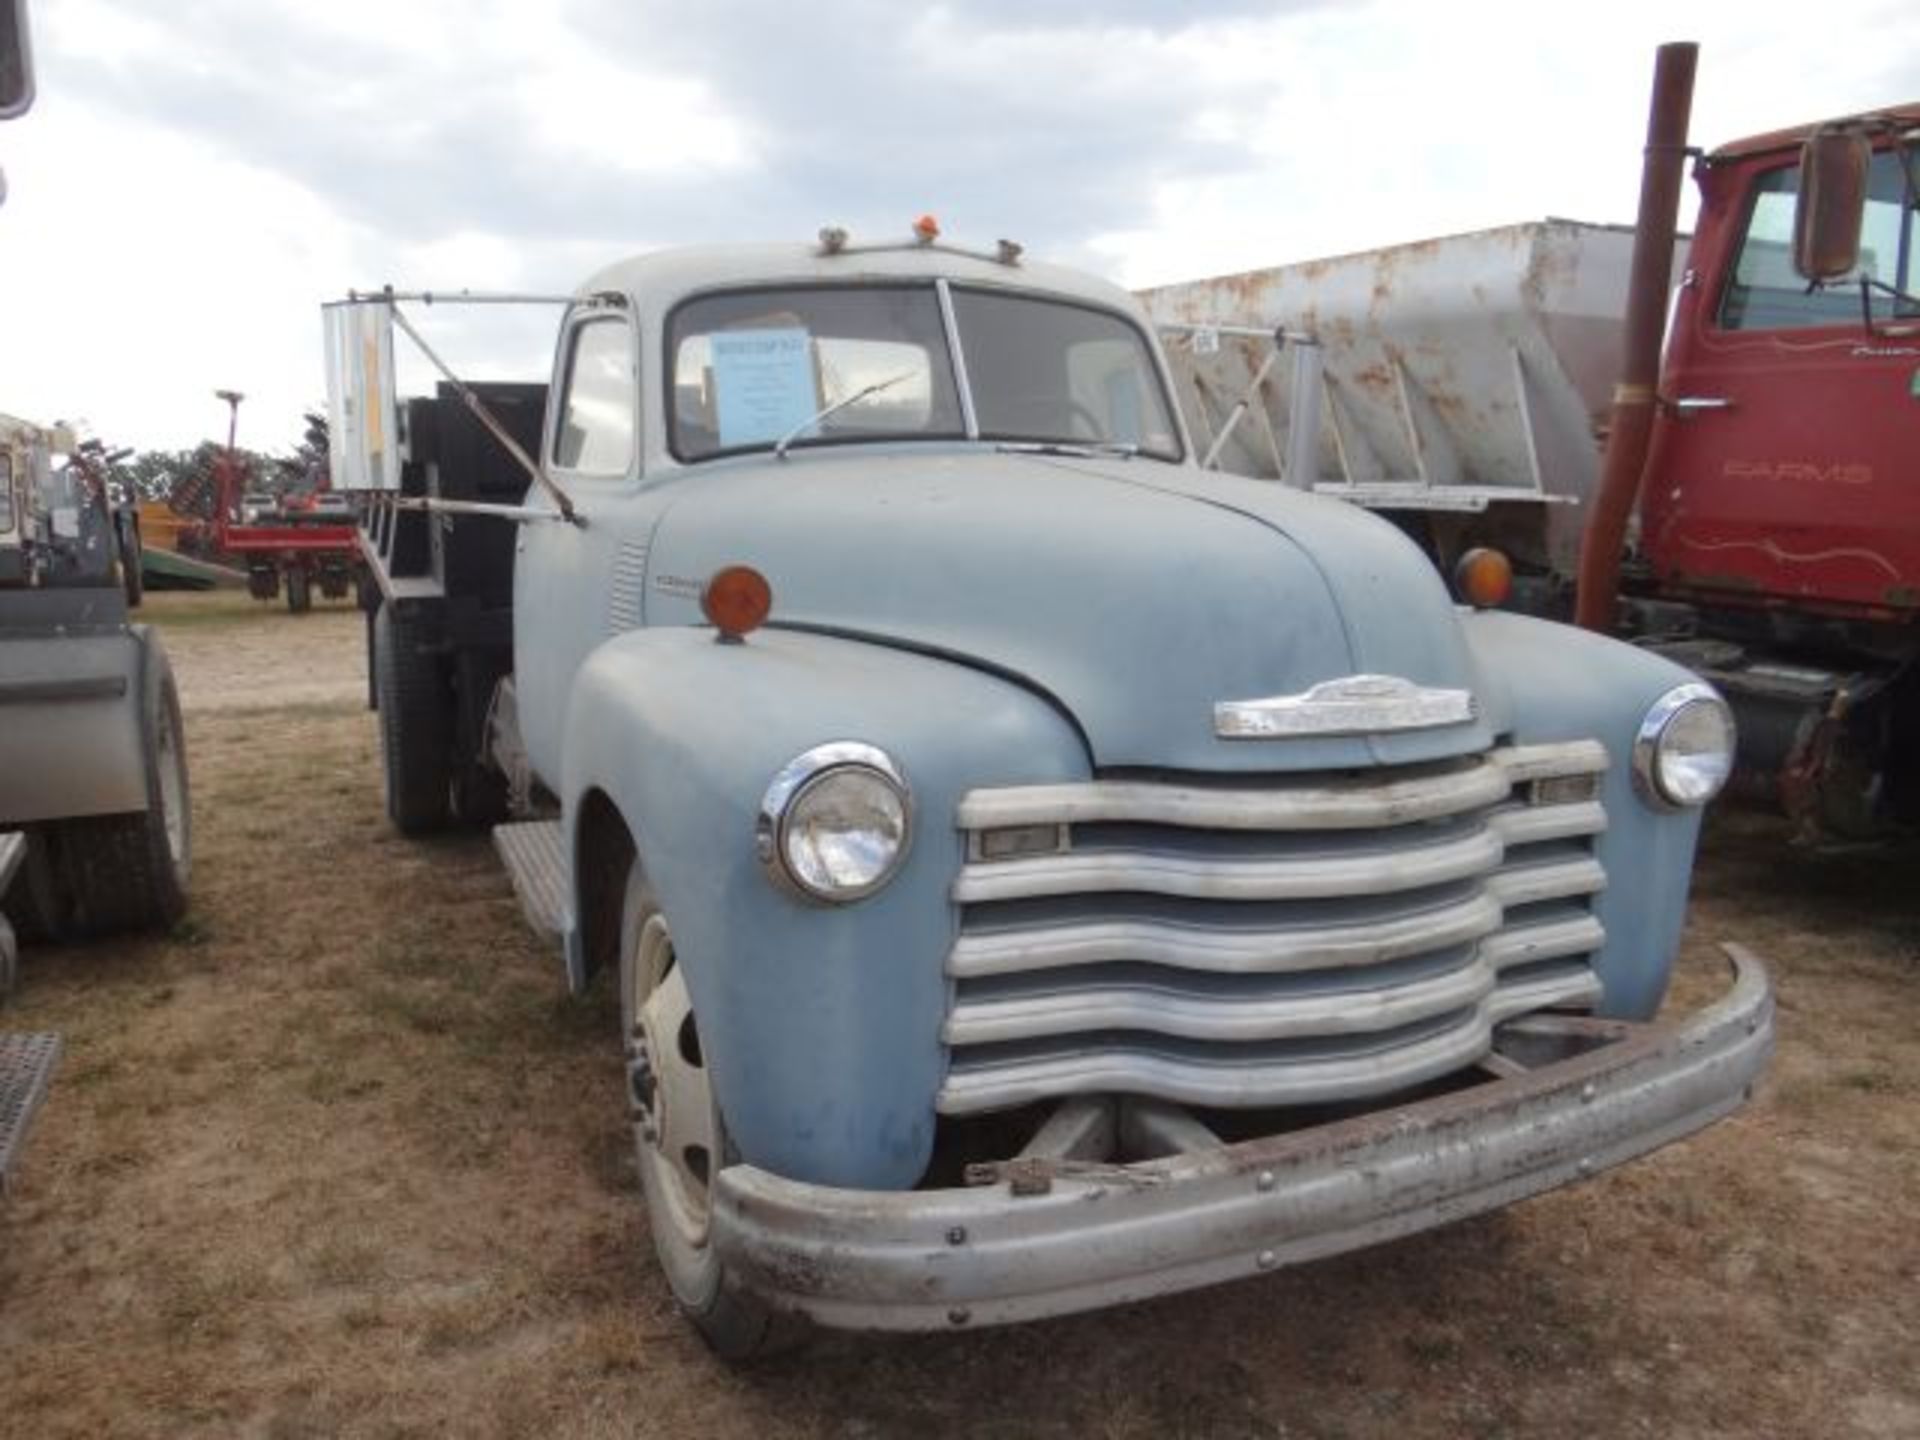 1947 Chevy Dump Truck Title in the Office - Image 2 of 4